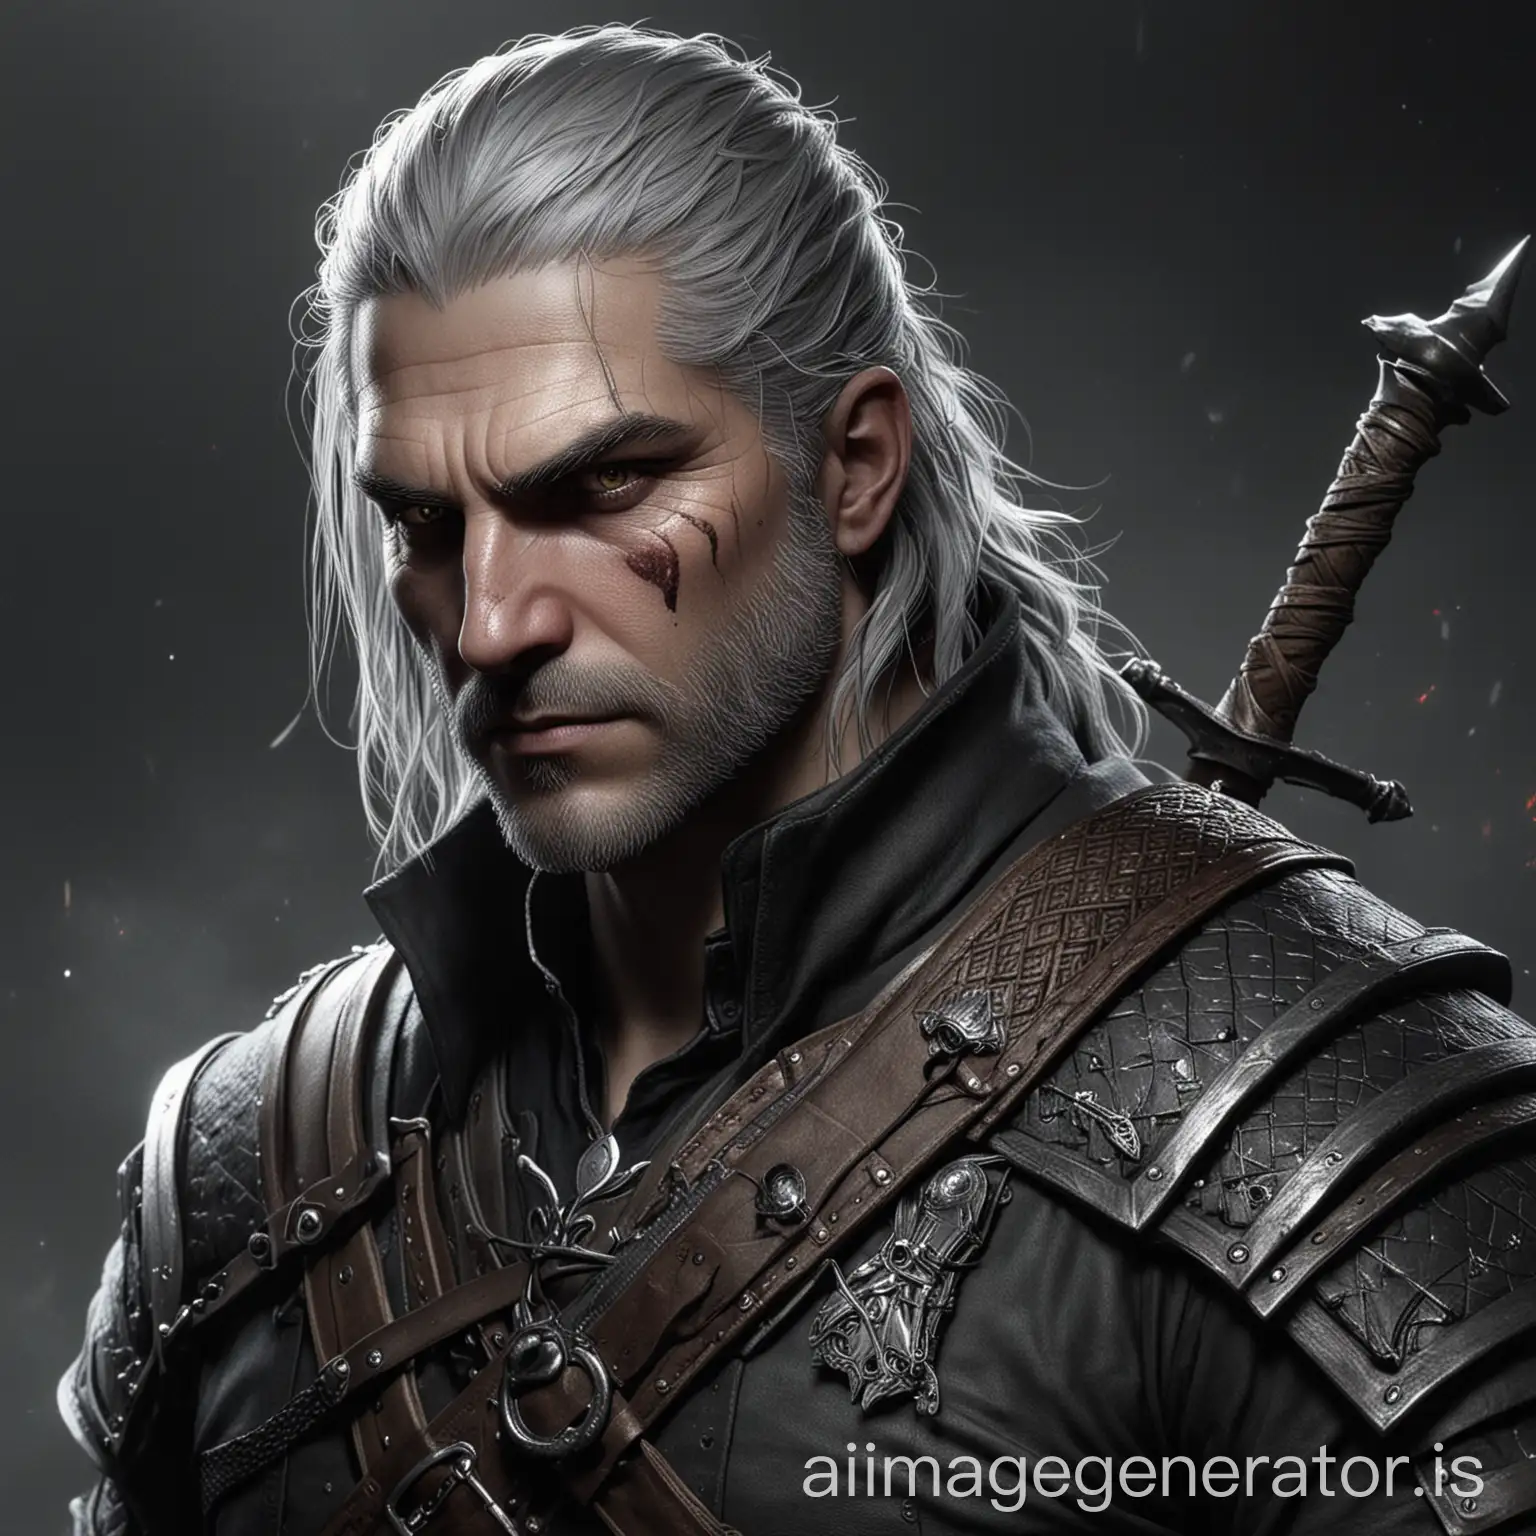 A mix of Geralt of Rivia and The Hunter from Bloodborne